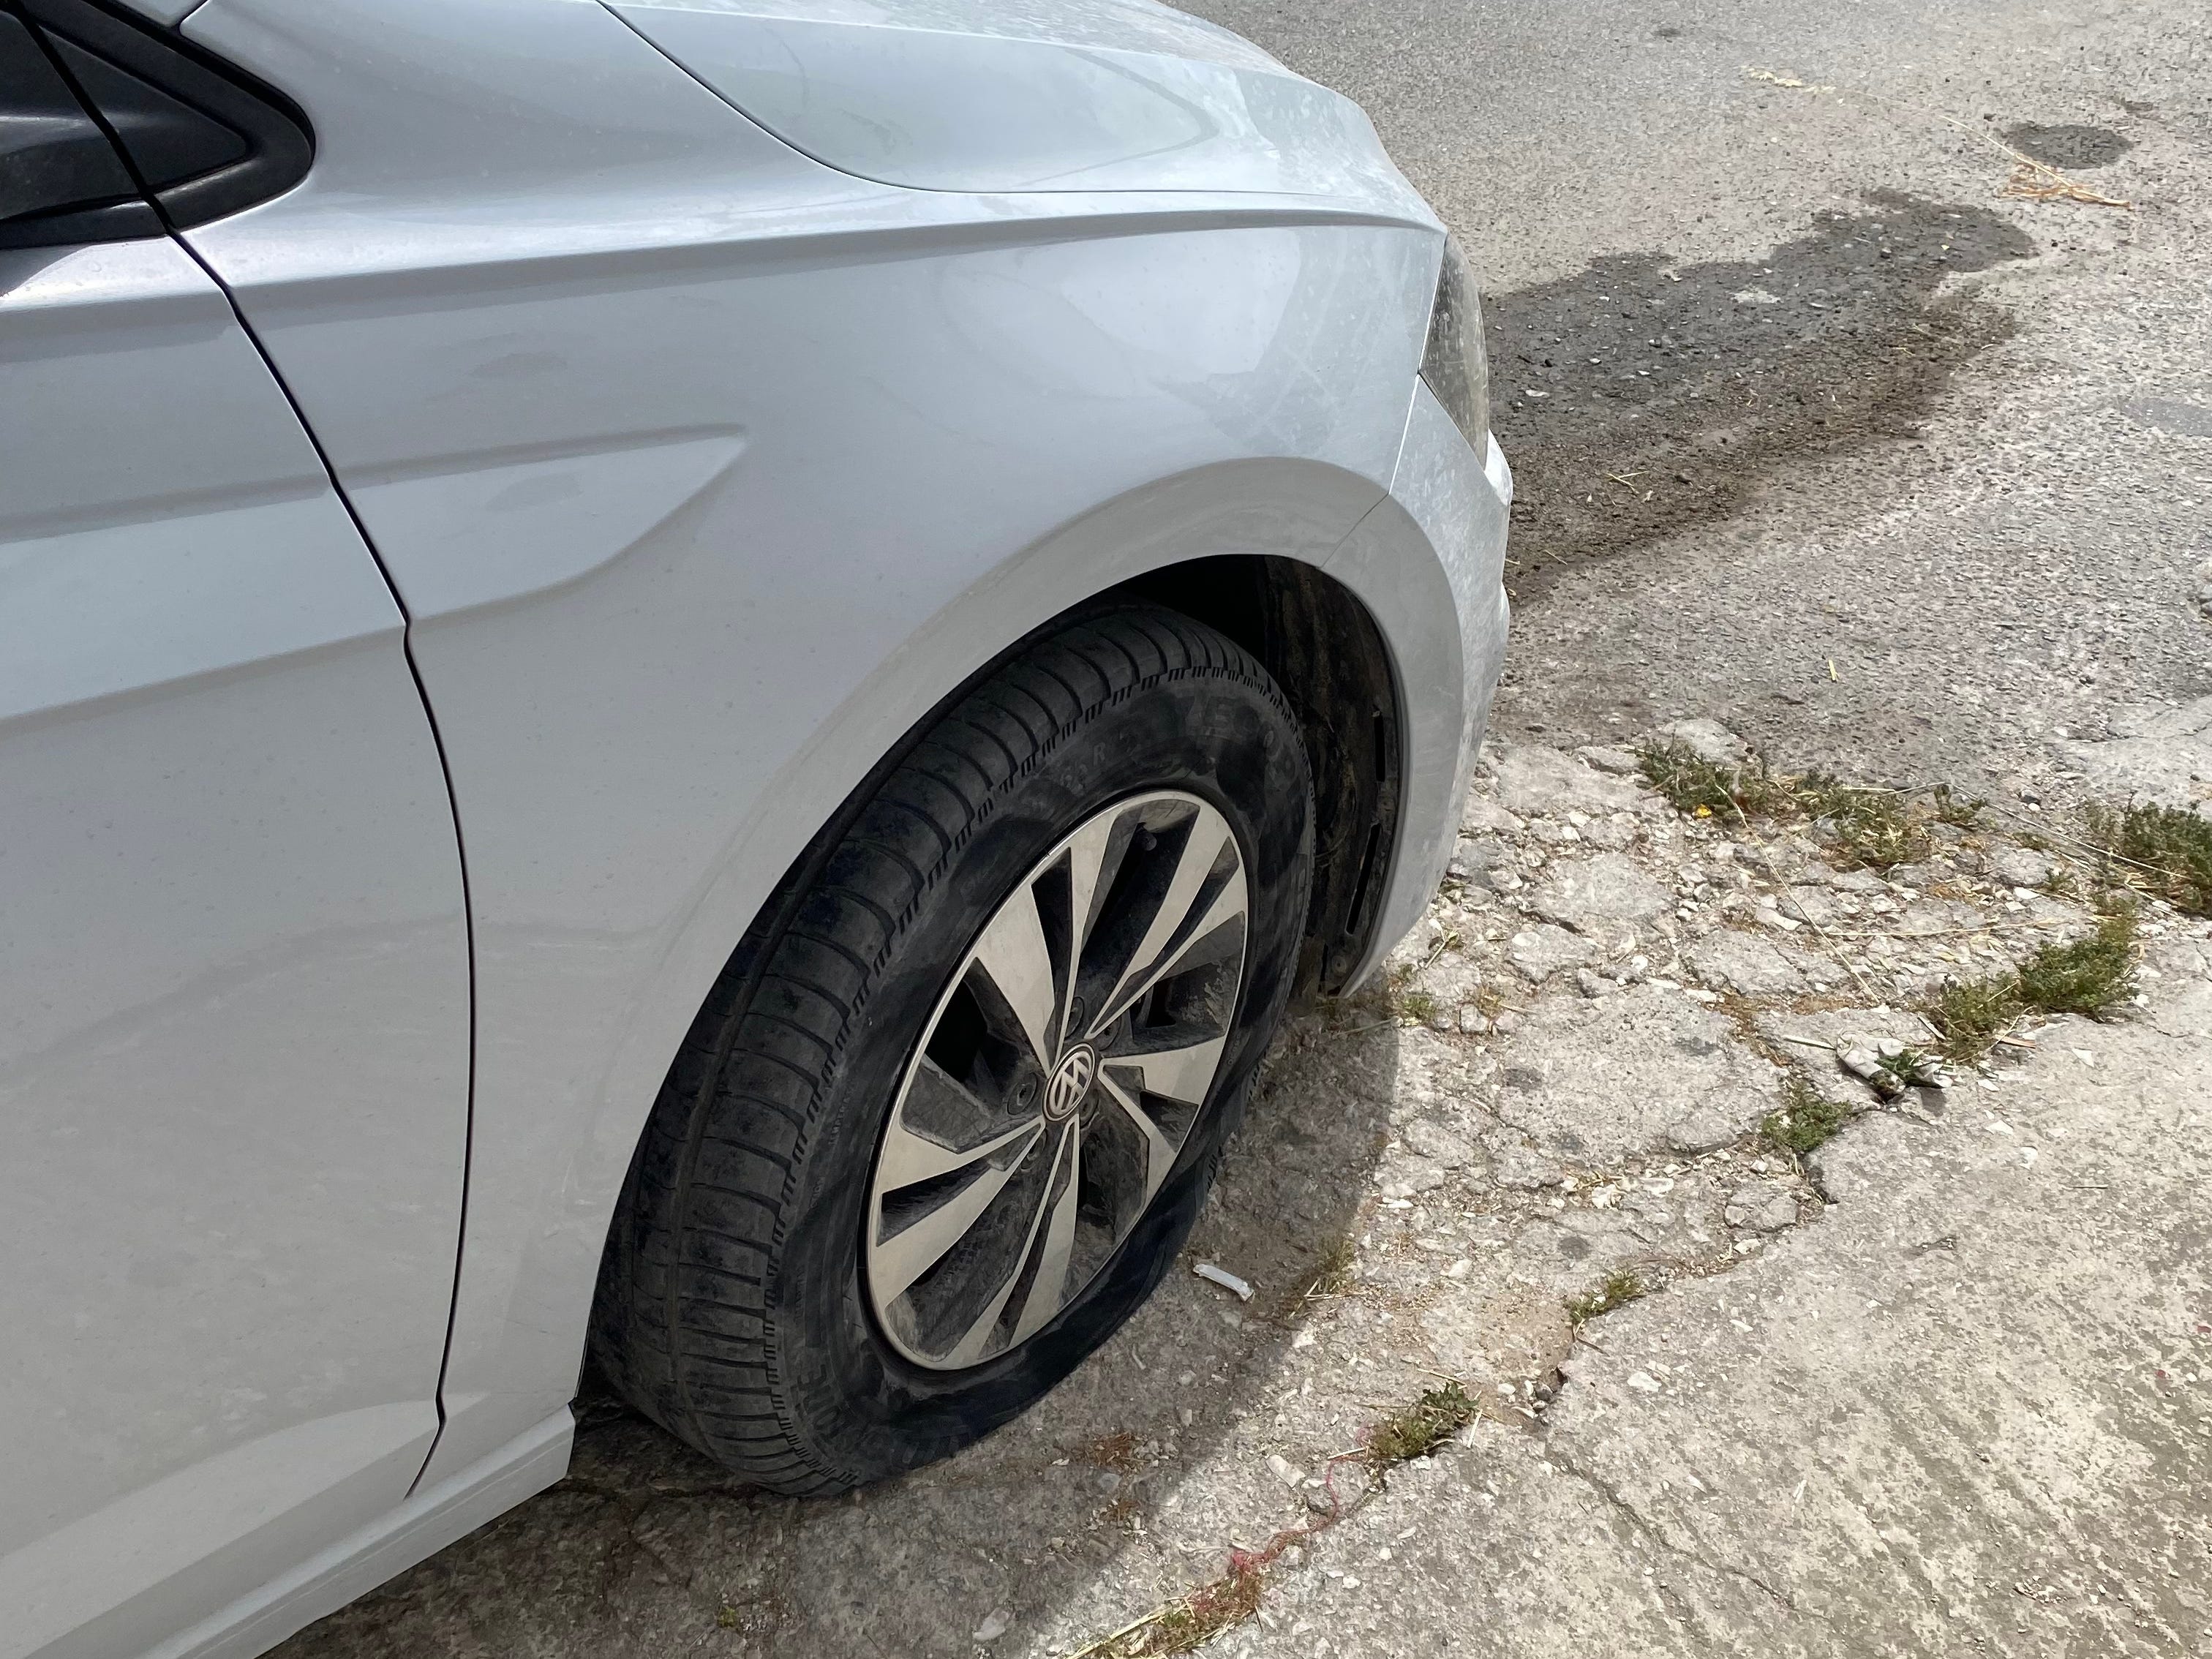 <p>We thought we were being smart by renting a car to explore Naxos, but it turned out to be the biggest mistake of the trip.</p><p>Our GPS service wasn't always great, and it often took us down smaller roads full of sharp rocks. We ended up with not one but two flat tires.</p><p>When we returned the car, we split the bill for the tire repair. But as we were boarding the ferry to leave the island, the owners came down on their motorcycle demanding <em>more </em>money for <em>more</em> damages.</p><p>There went our budget — and our dignity.</p>